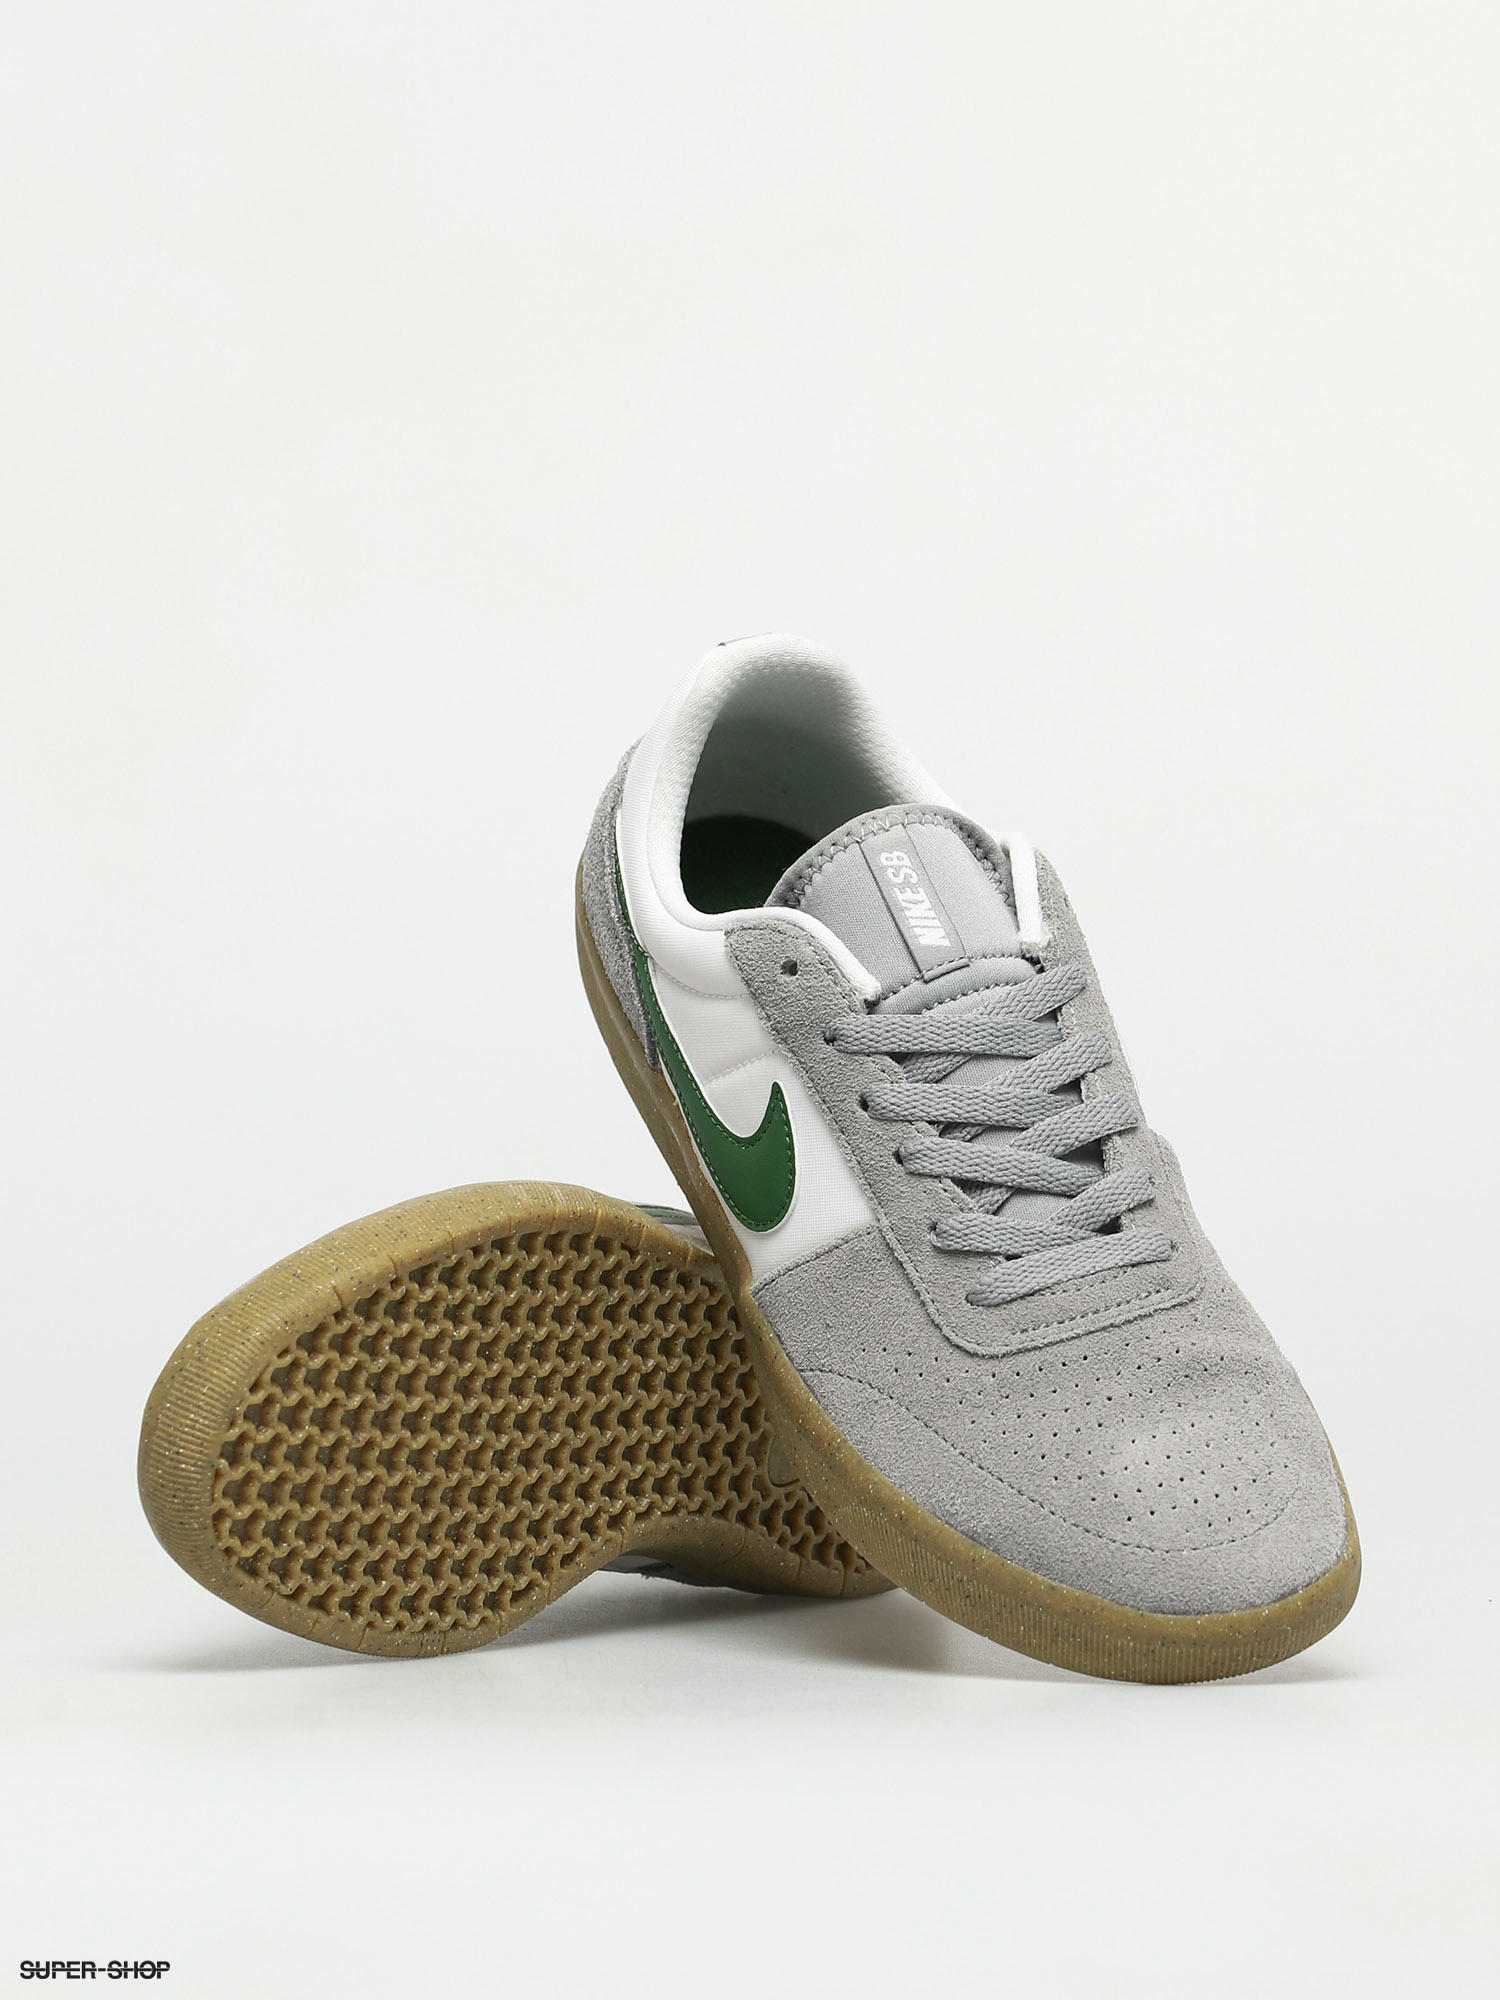 Marchito Omitir Tibio Nike SB Team Classic Shoes (particle grey/forest green particle grey)